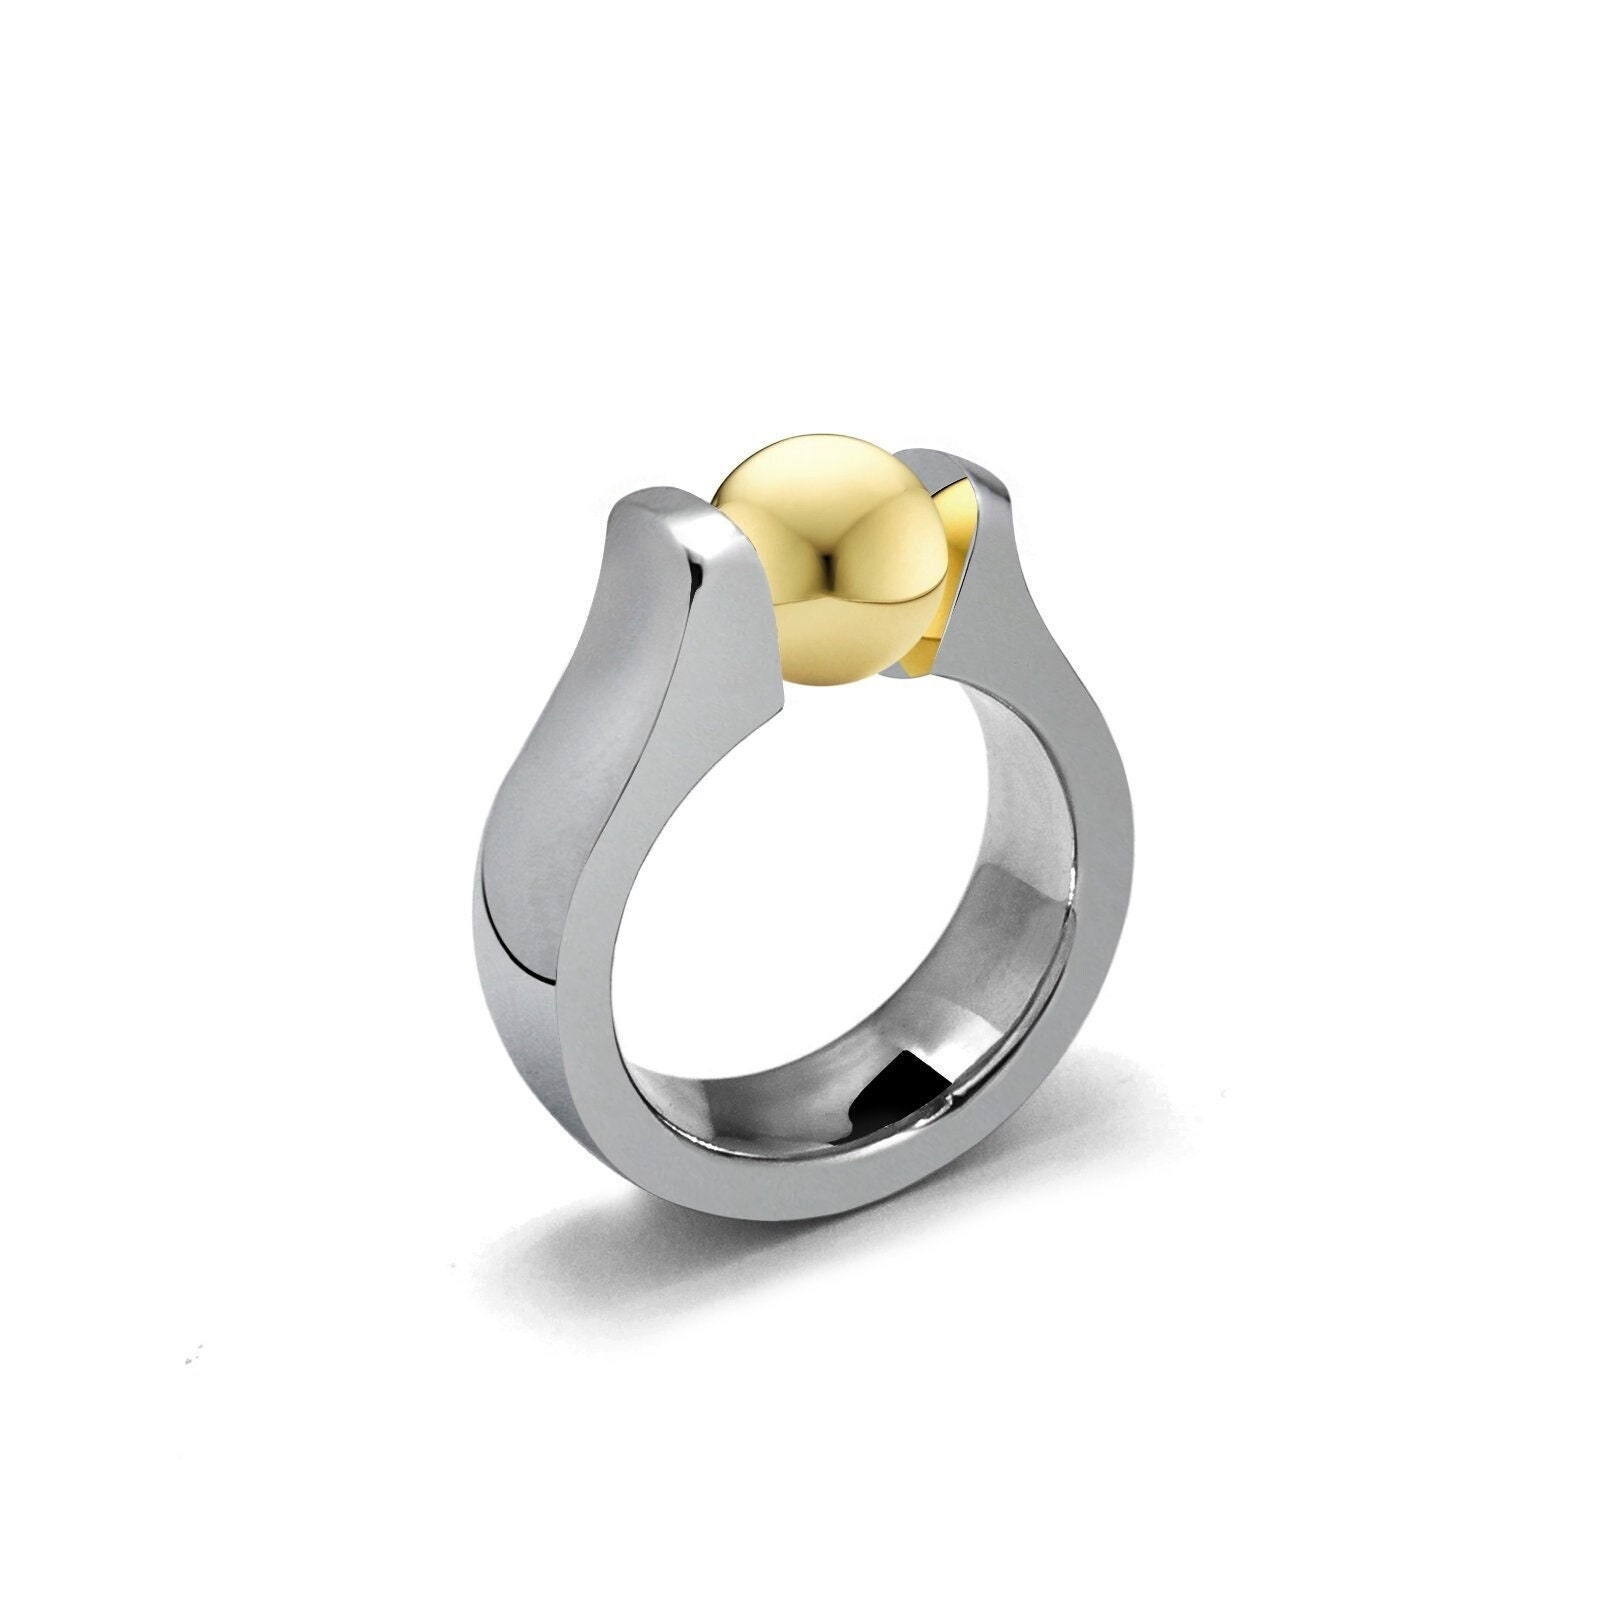 Gold and Stainless Steel Tension Ring Two Tone design by Taormina Jewelry